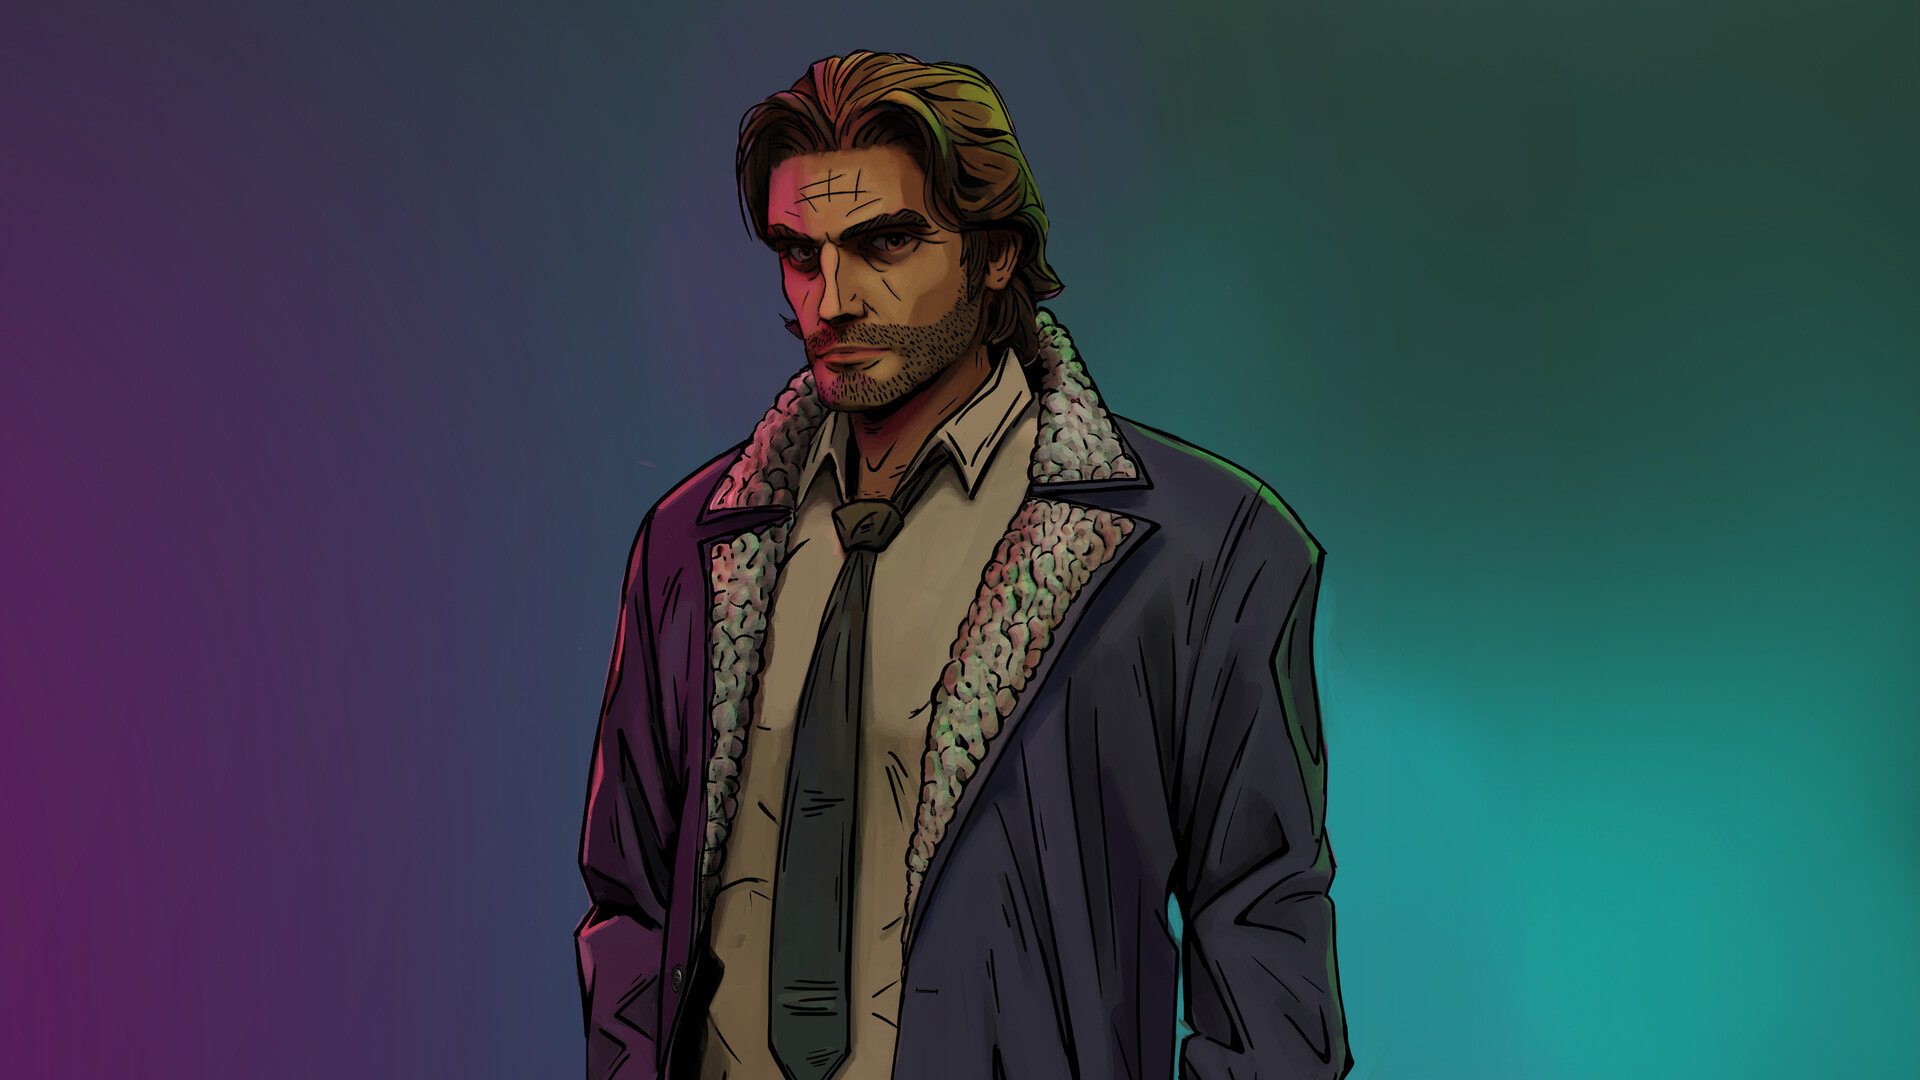 The Wolf Among Us The Big Bad Wolf Telltale Games PC Gaming Video Games A Telltale Games Series 1920x1080